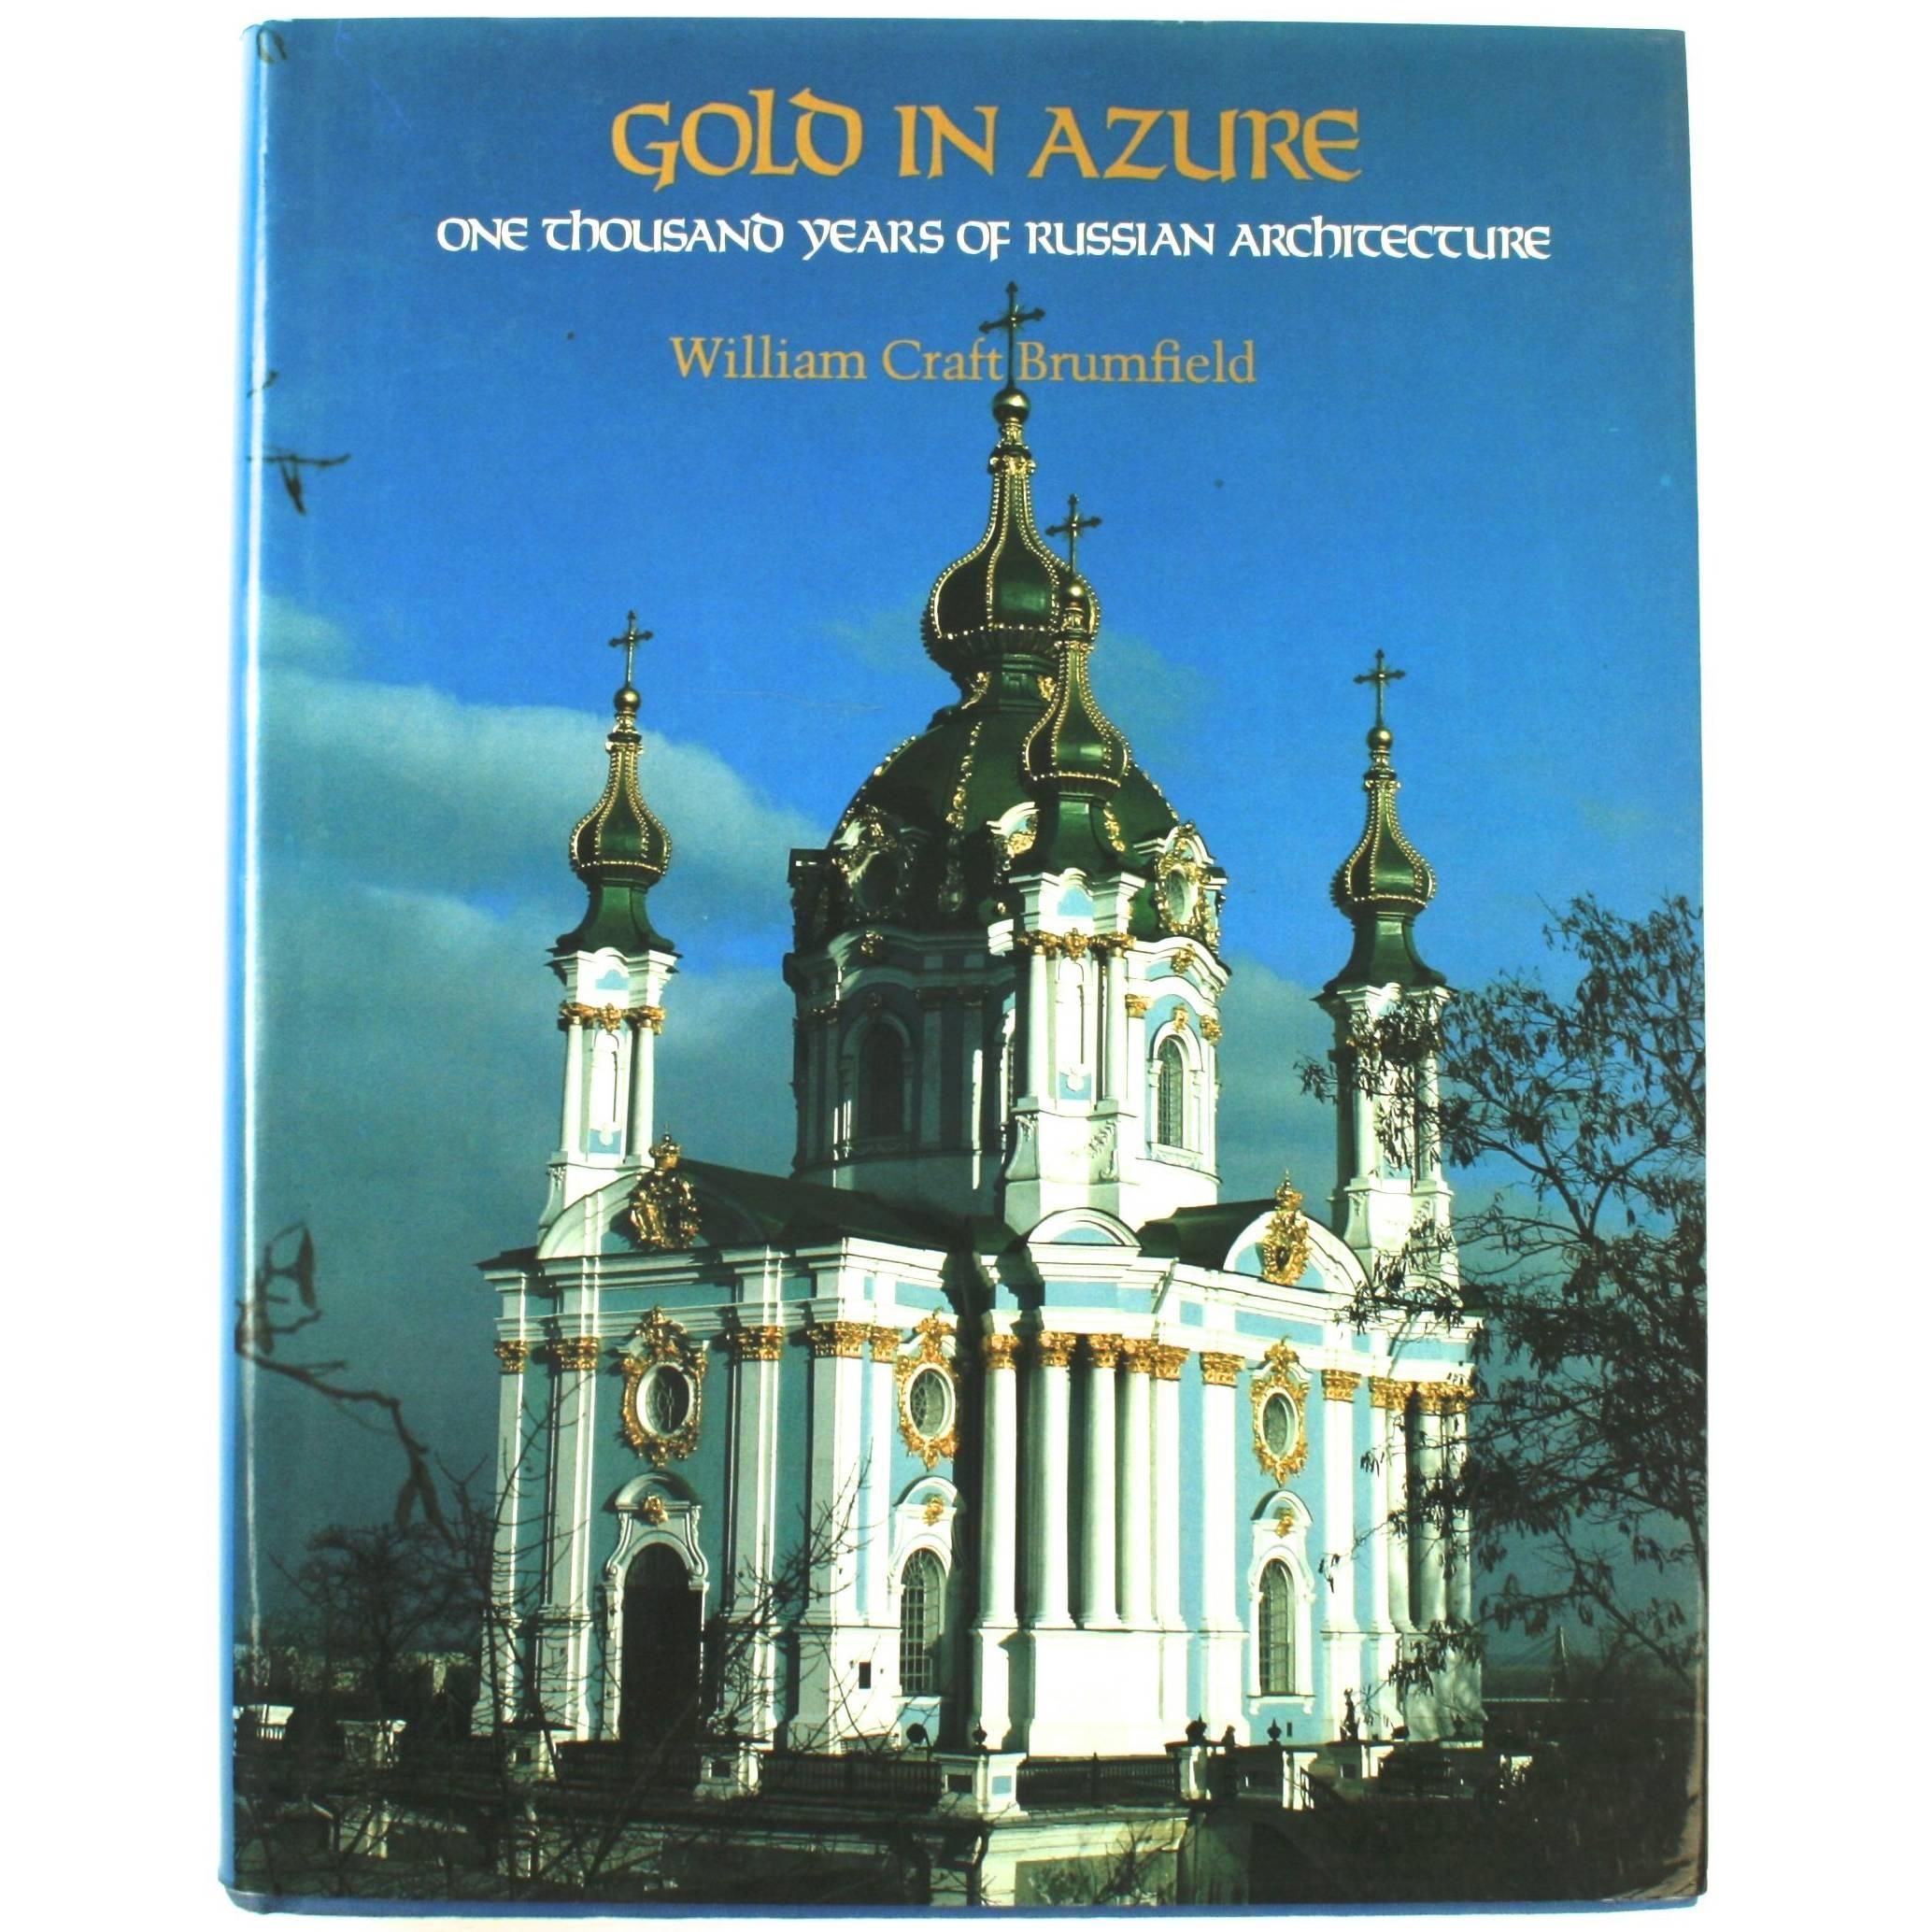 Gold in Azure One Thousand Years of Russian Architecture, First Edition